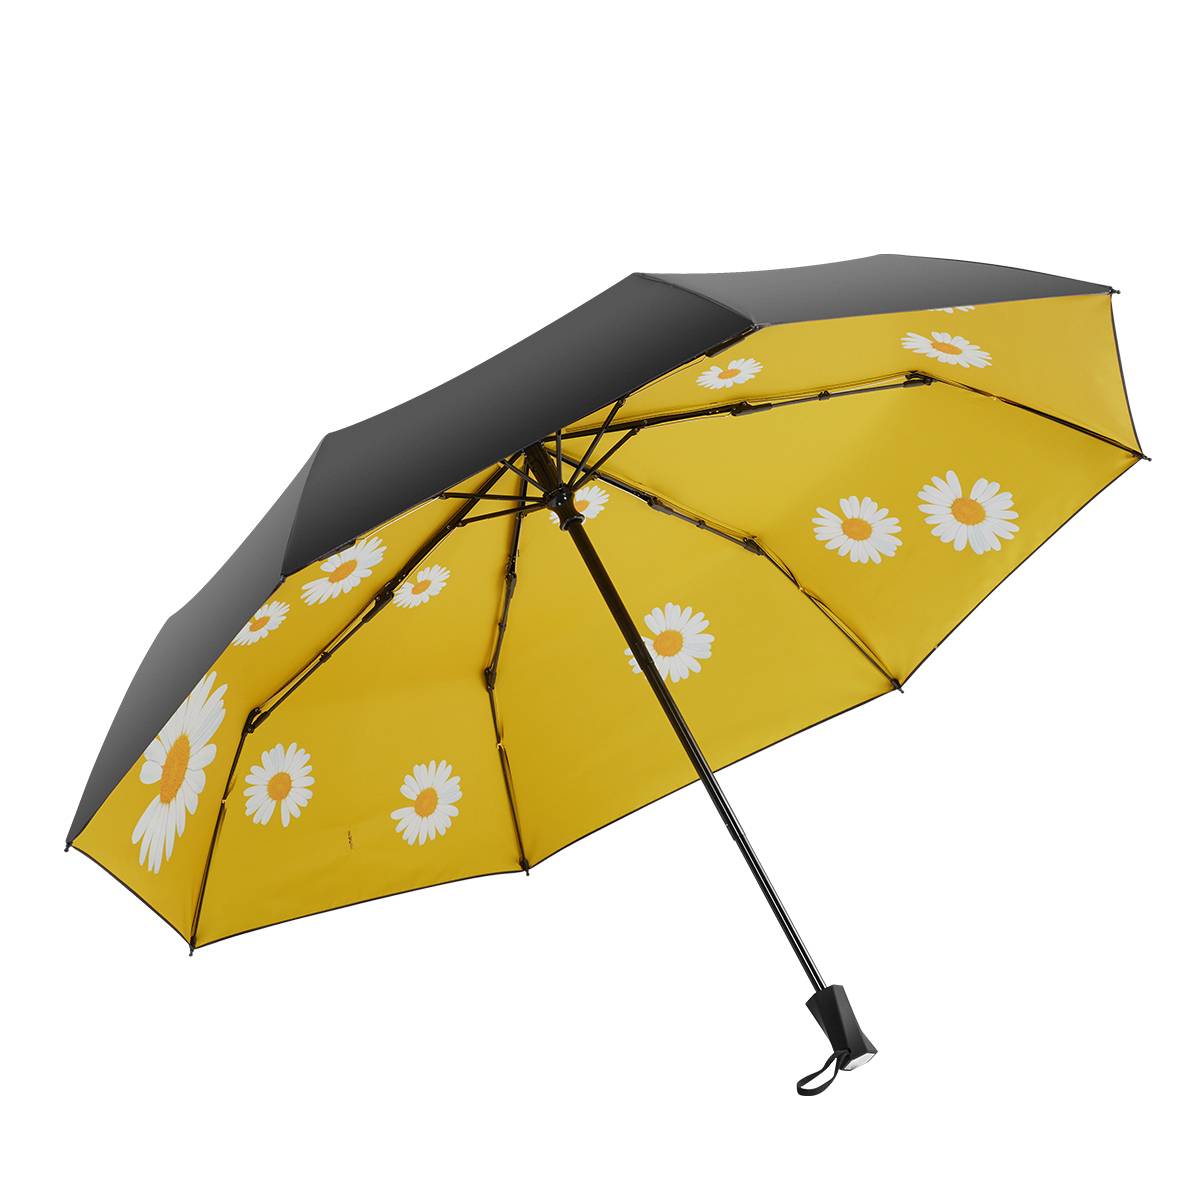 Cheapest Price Four Panel Umbrella - 21 inch 8 ribs manual open unique handle design with daisy flower 3 fold umbrella – DongFangZhanXin